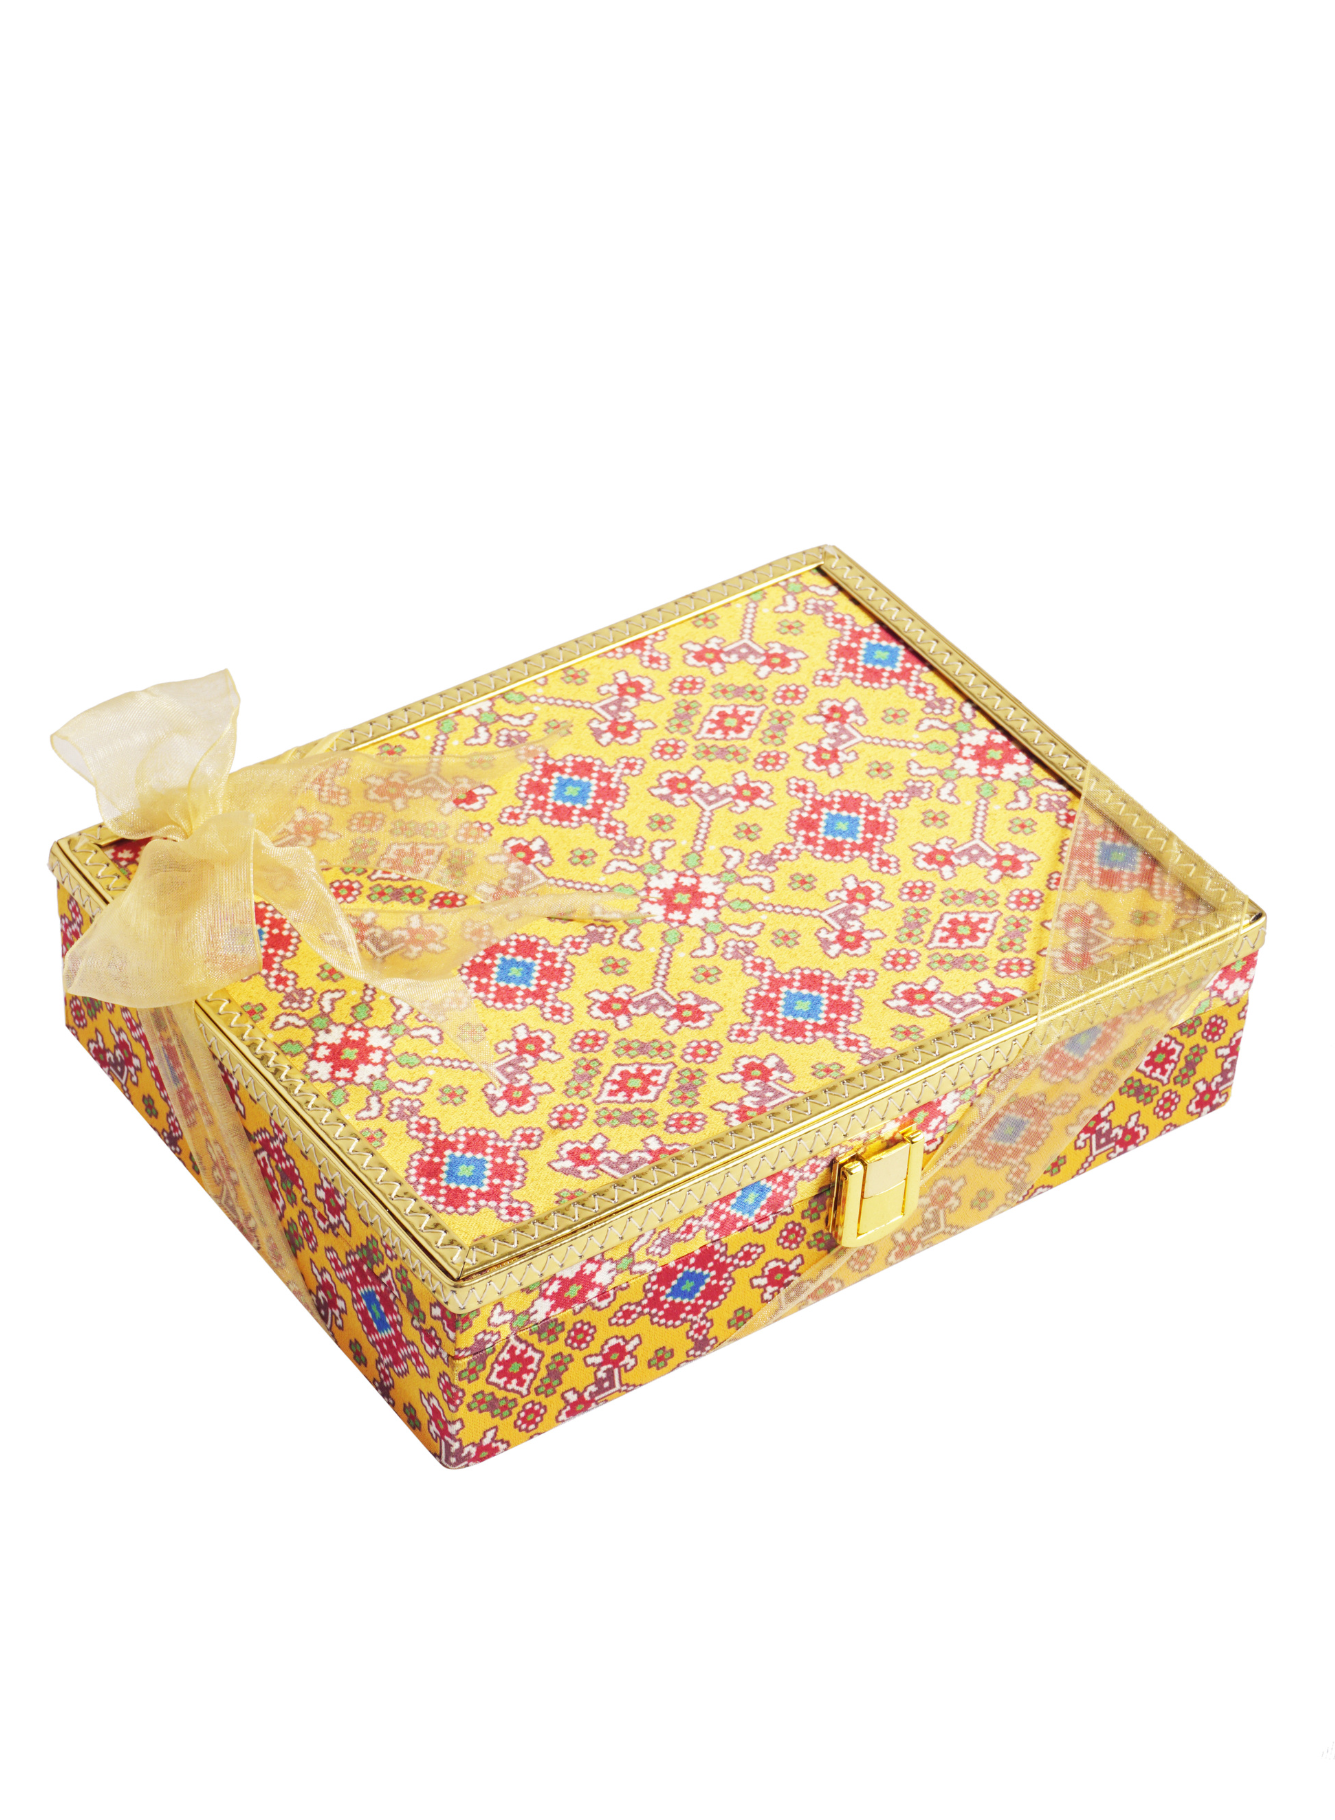 Medjoul Dates with Yellow Patola MDF Box With Gold Leather Finish (15 Pcs)